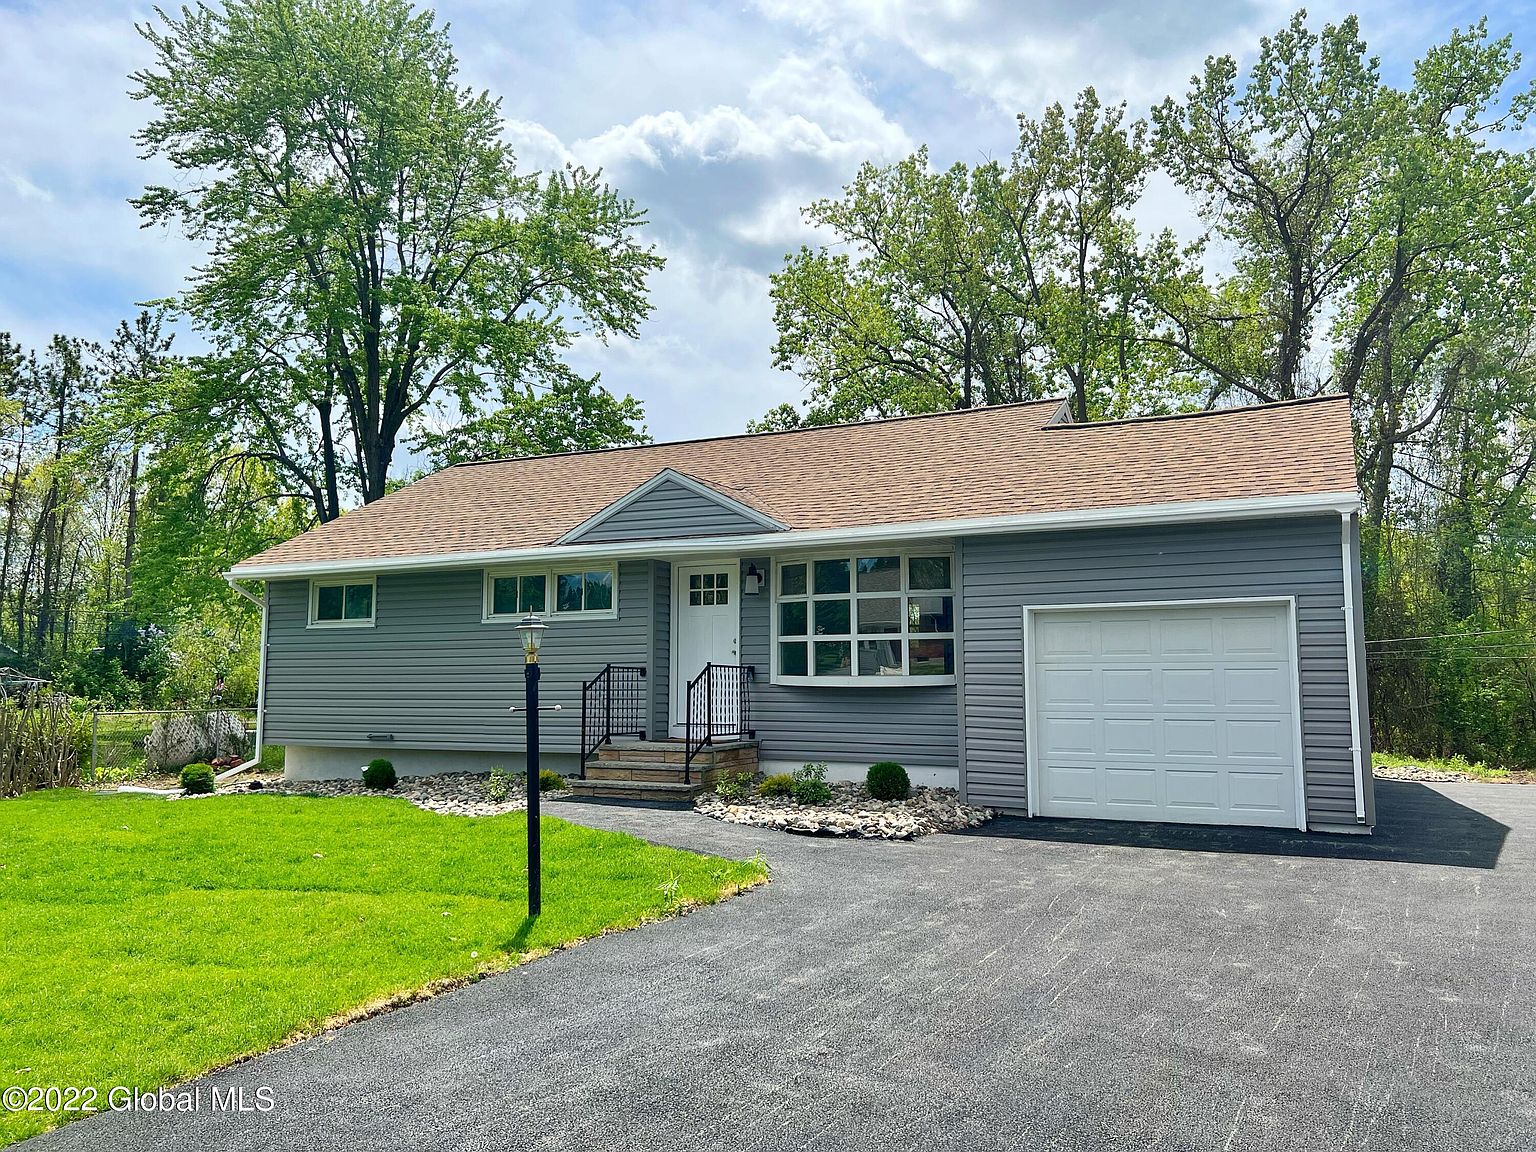 37 Chateau Court Loudonville NY 12211 Zillow